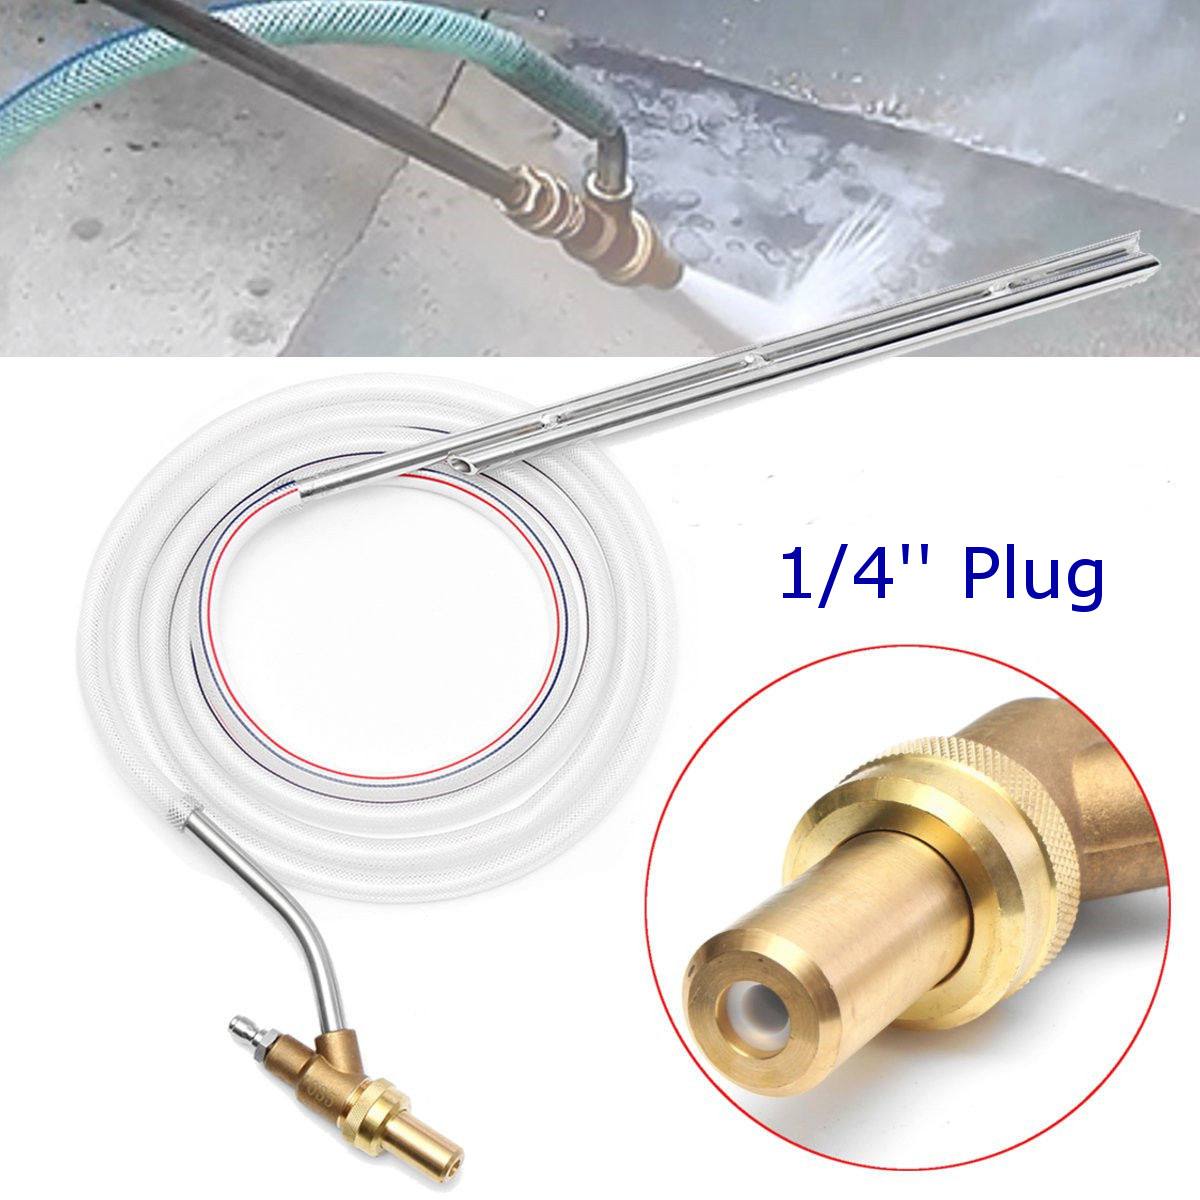 14-Inch-Plug-260BAR-Pressure-Washer-Hose-Paint-Stripper-Cleaning-Tool-Kit-1339795-1